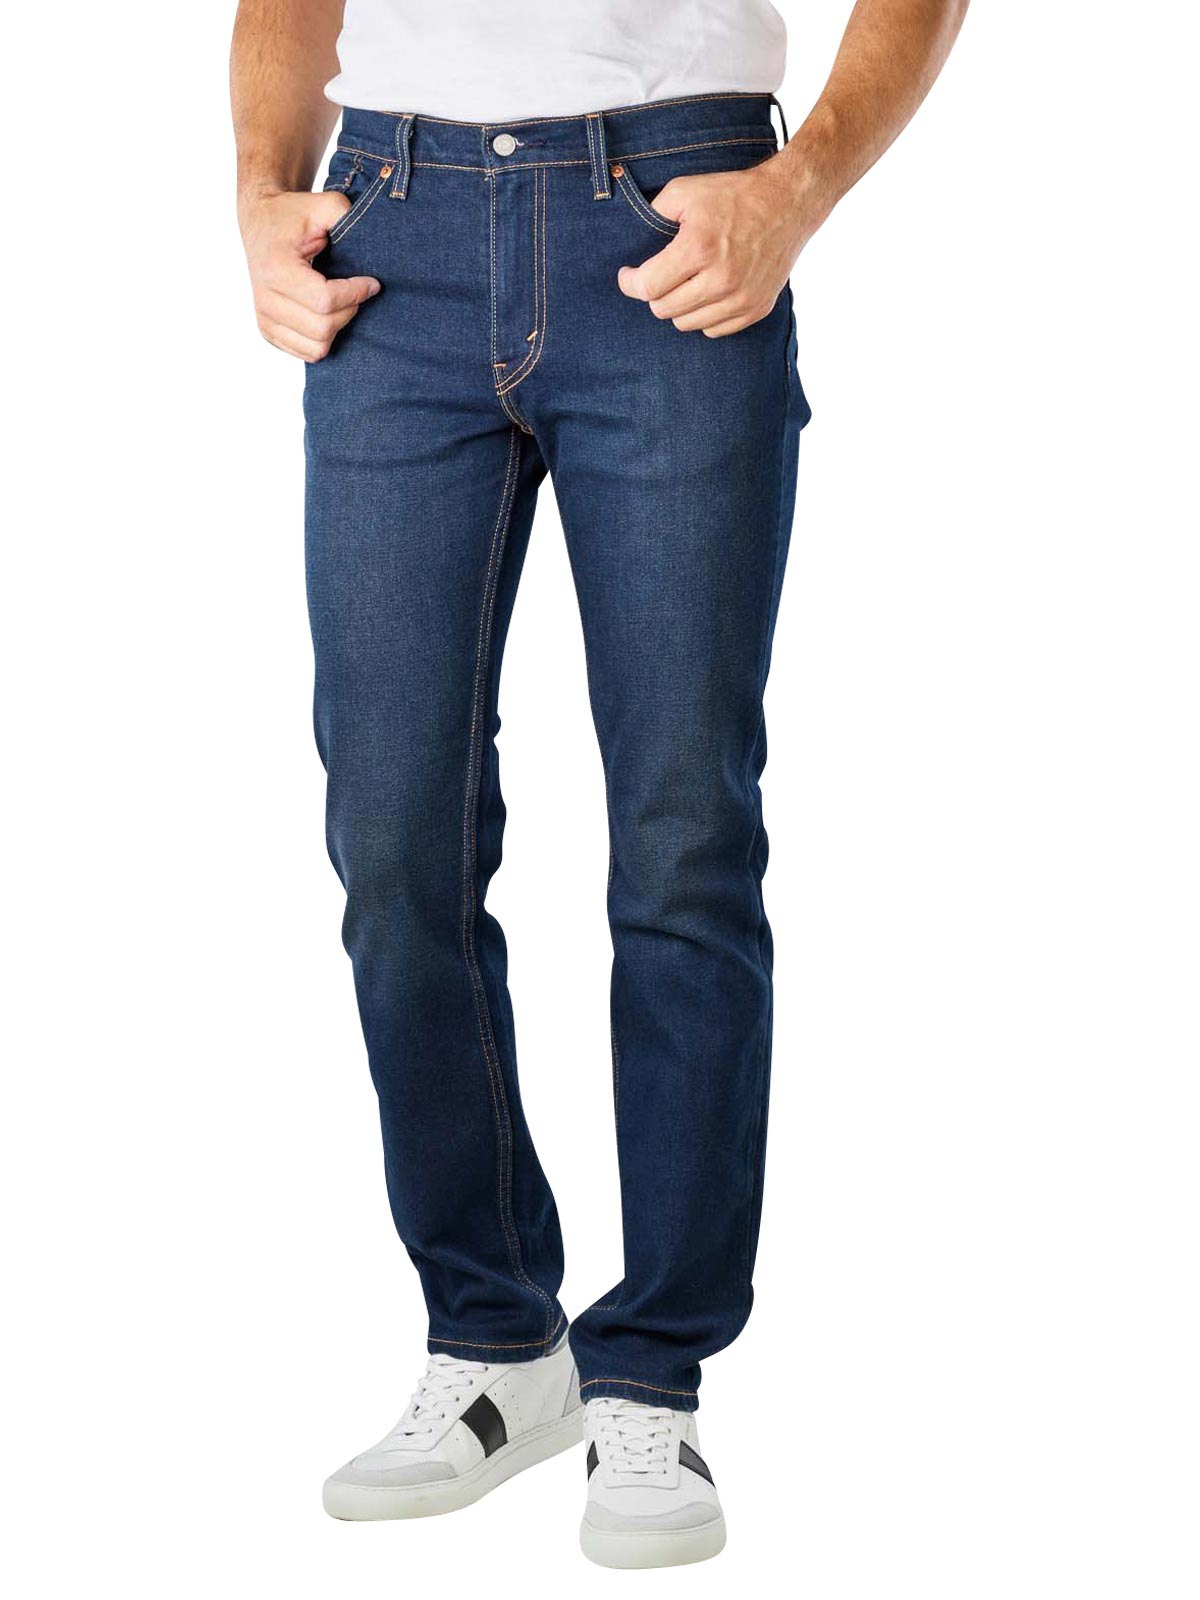 Levi's 511 Jeans Slim Fit Spruce Adapt Levi's Men's Jeans | Free Shipping  on  - SIMPLY LOOK GOOD